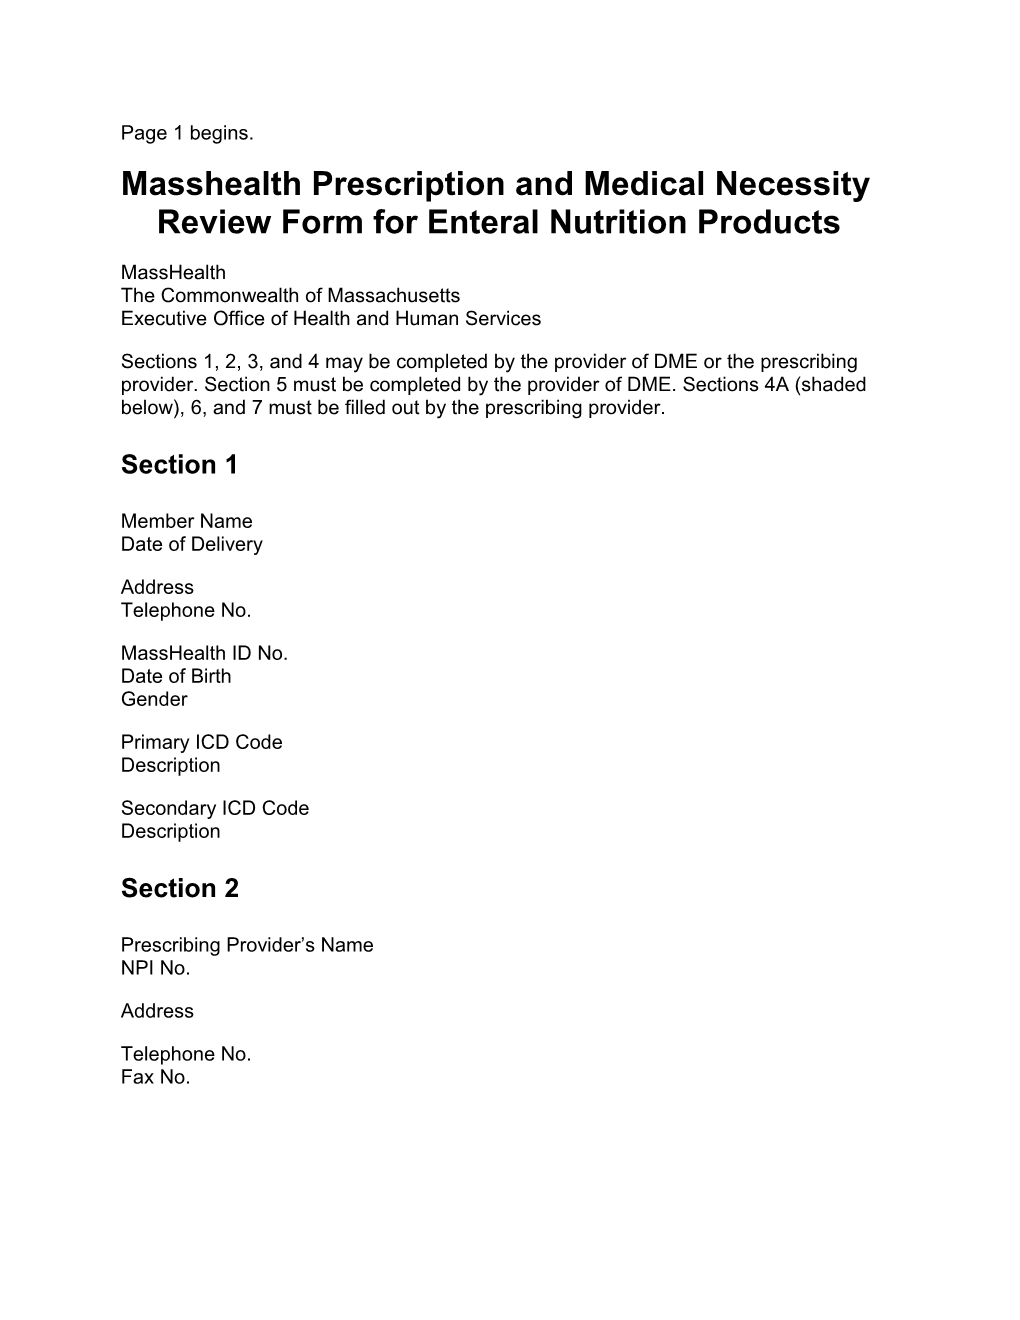 Masshealth Prescription and Medical Necessity Review Form for Enteral Nutrition Products